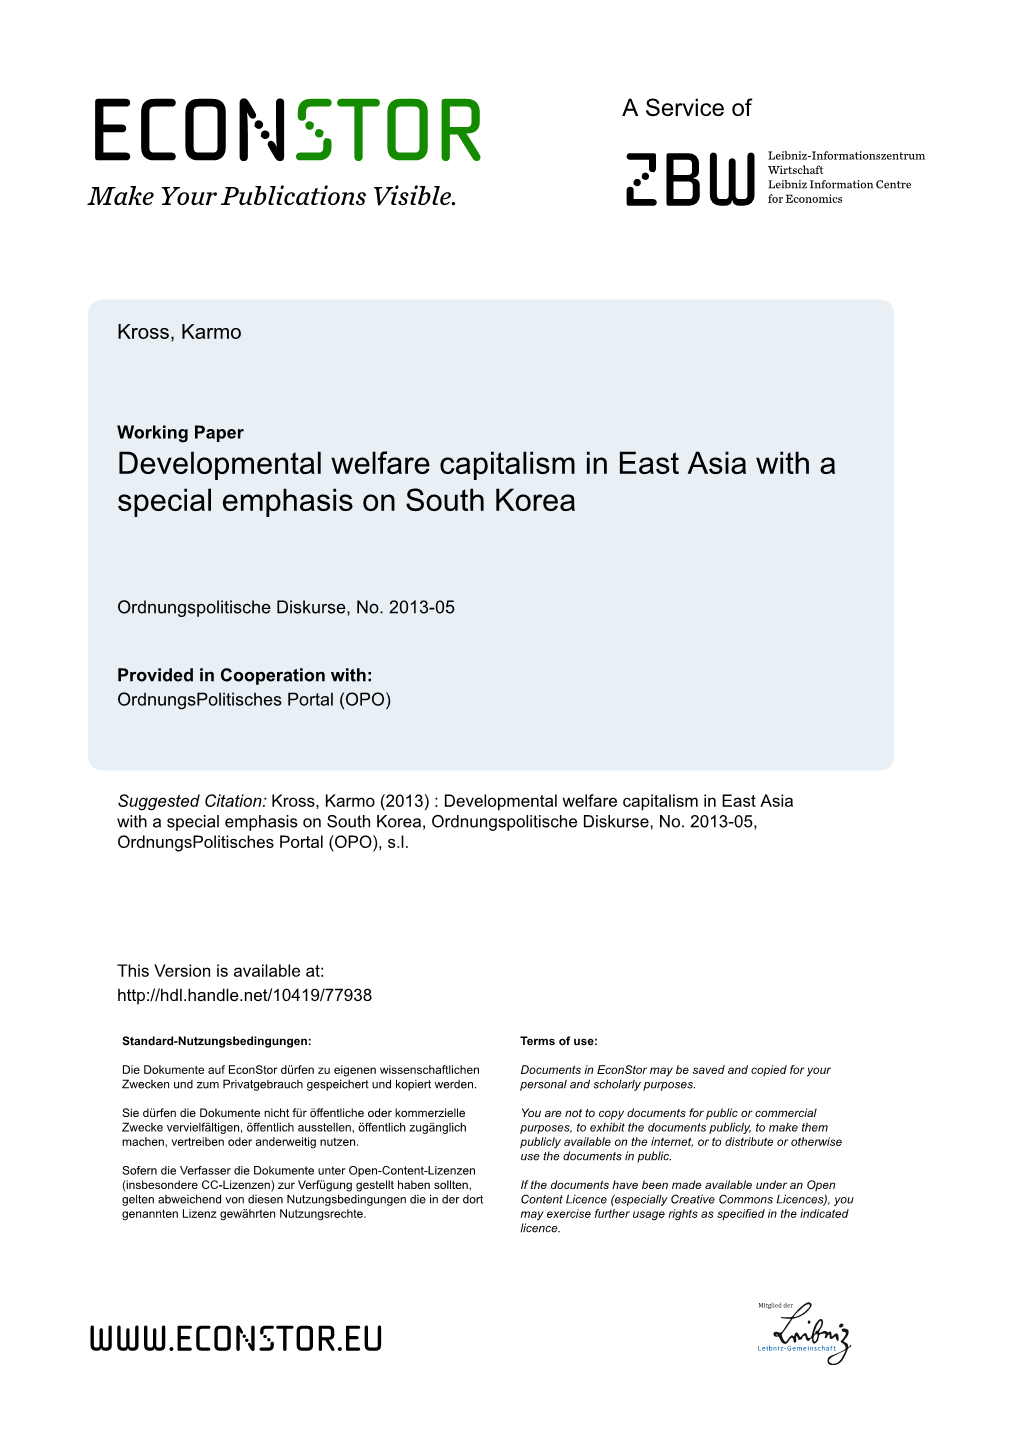 Developmental Welfare Capitalism in East Asia with a Special Emphasis on South Korea